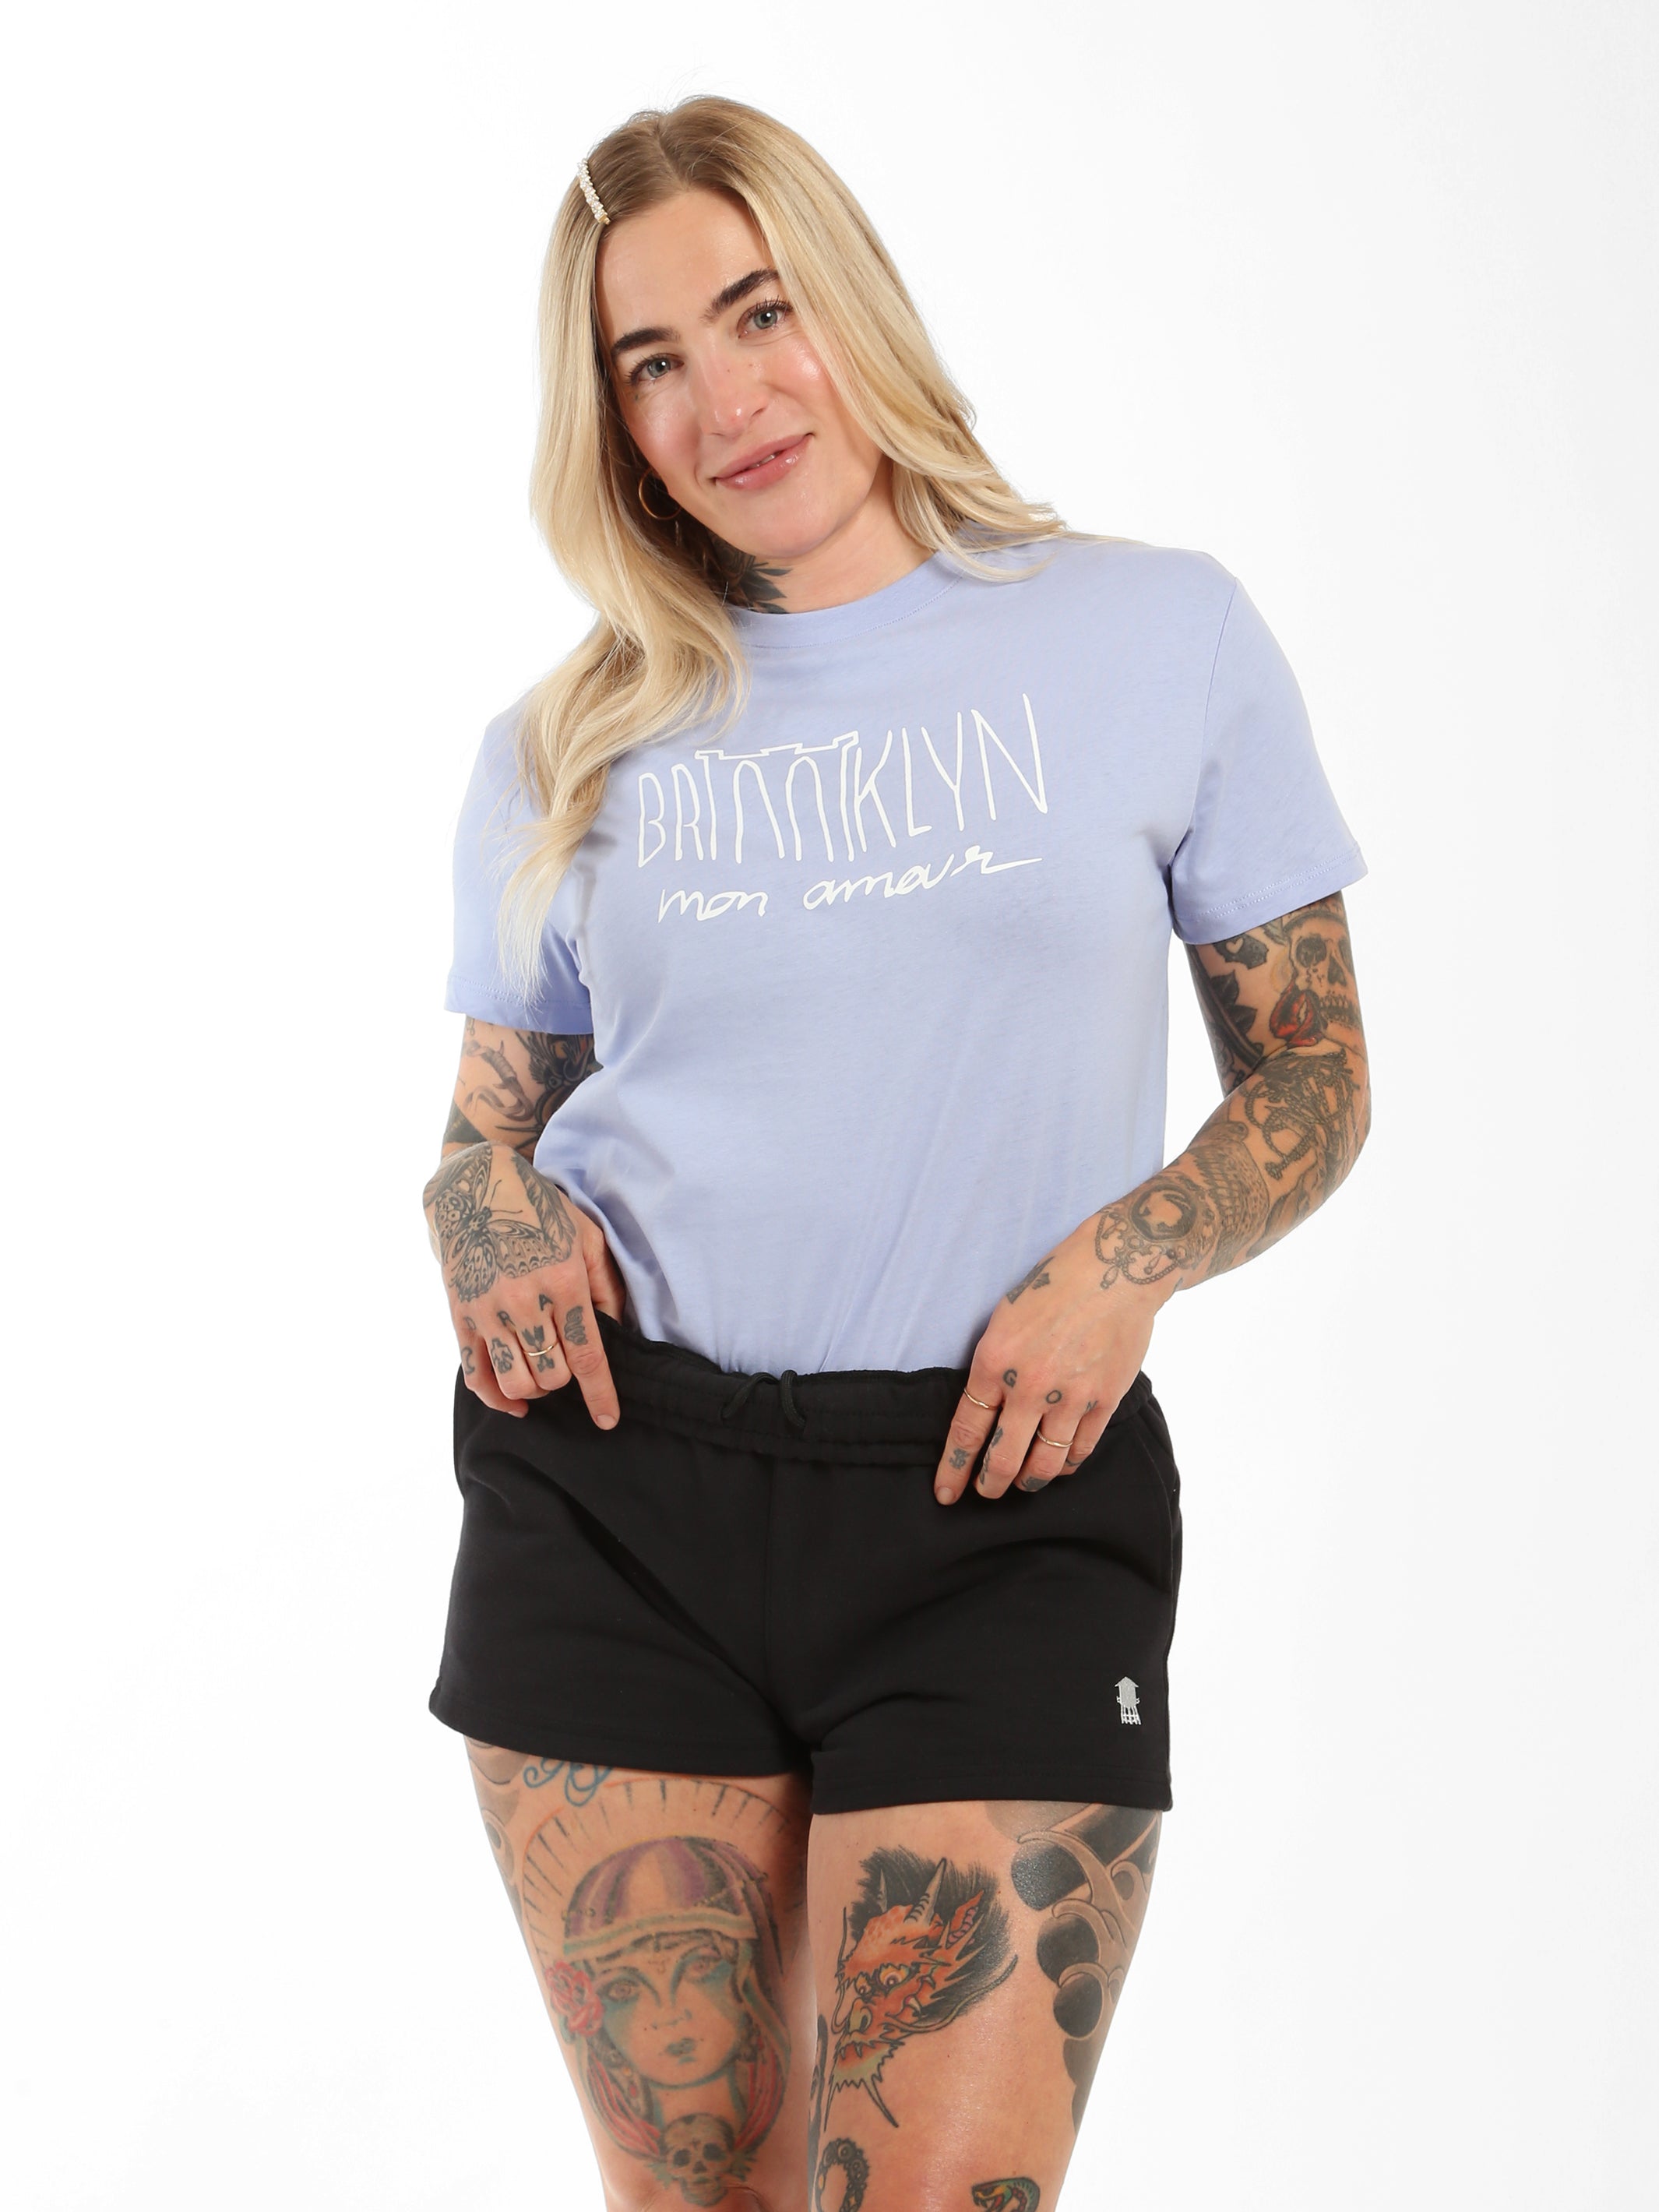 Women's Brooklyn Mon Amour T-shirt in Easter Egg - BROOKLYN INDUSTRIES